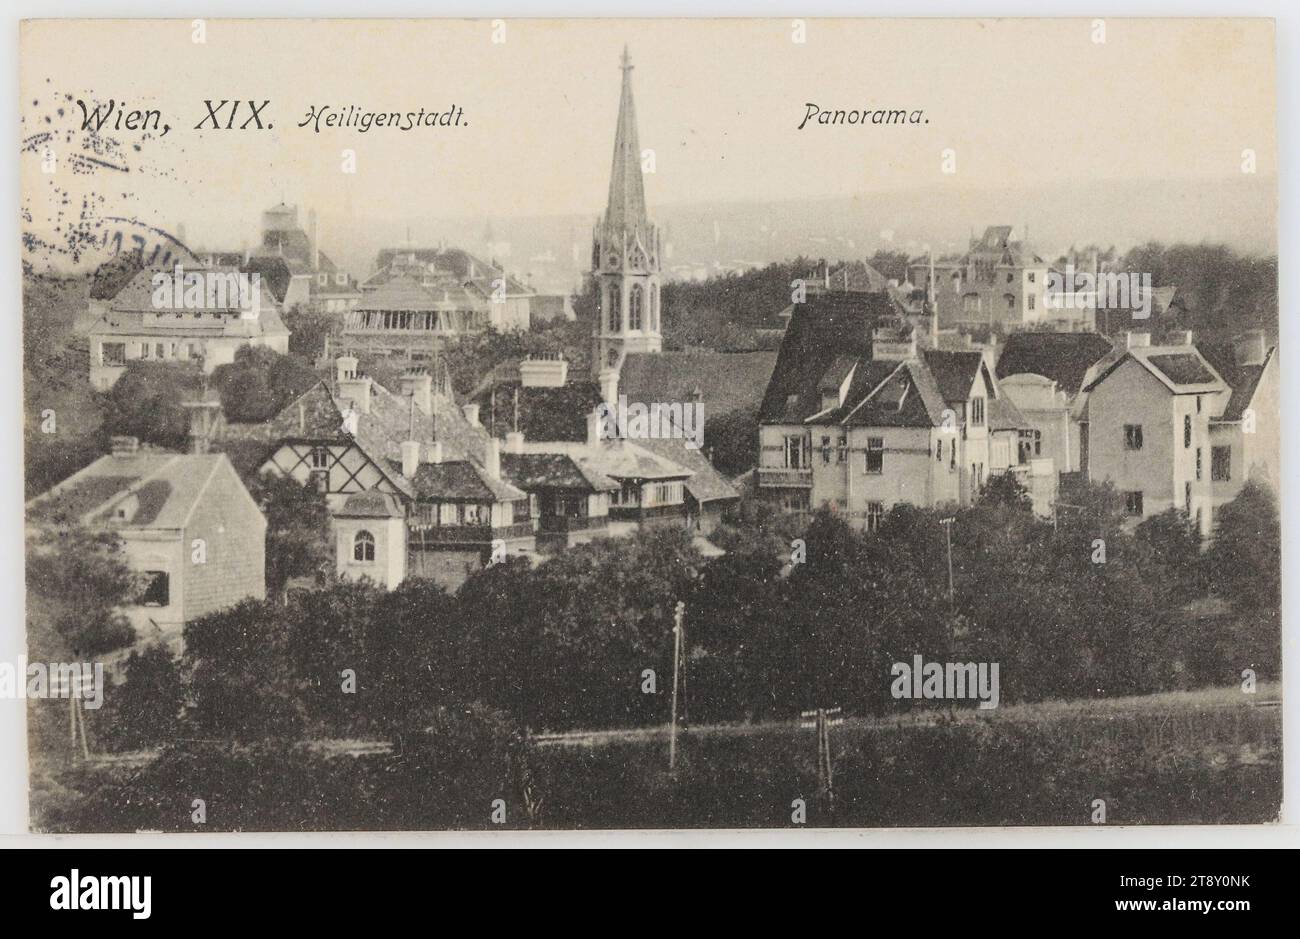 19th, Panorama of Heiligenstadt, picture postcard, Sperlings Postkartenverlag (M. M. S.), Producer, 1913, paperboard, Collotype, Inscription, FROM, Vienna (19th), TO, Krumbach (NÖ), ADDRESS, Hochgeboren, Frau, Krumbach, N. Öst, Aspangbahn, MESSAGE, Just learned that Erich's last exam, passed and turned out well, congratulations. He will be with us tonight. I am sorry for all of you, because of the terrible weather; I only hope that everything is well with you. We are glad to be in Vienna, although it looks bleak here, too. Please greet the children warmly and give yourself a hug Stock Photo